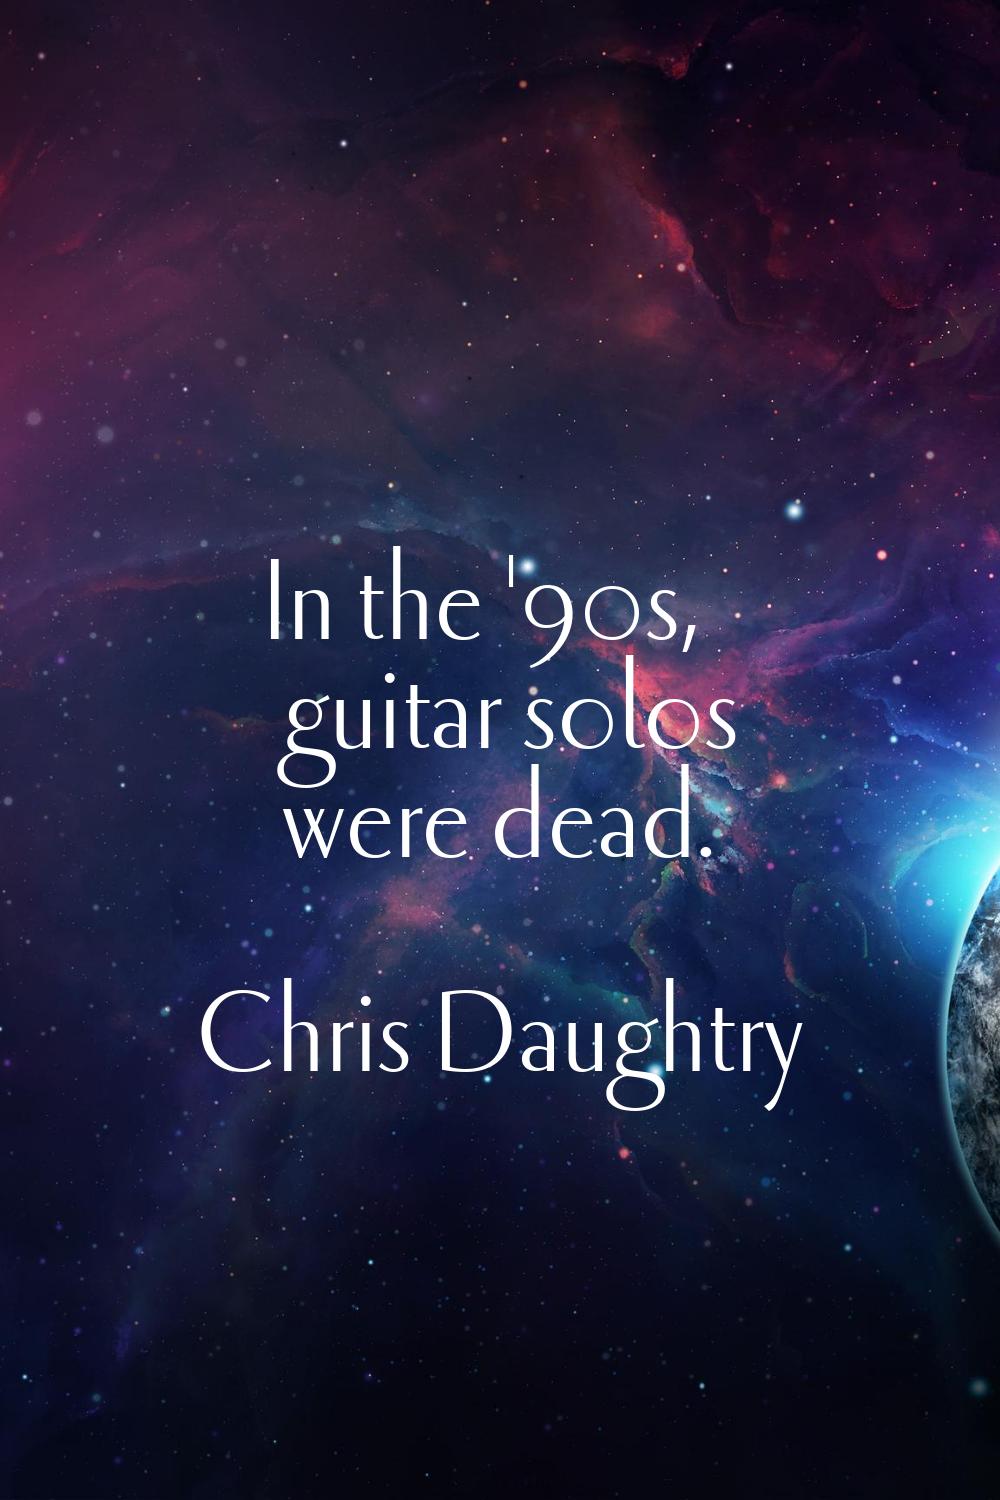 In the '90s, guitar solos were dead.